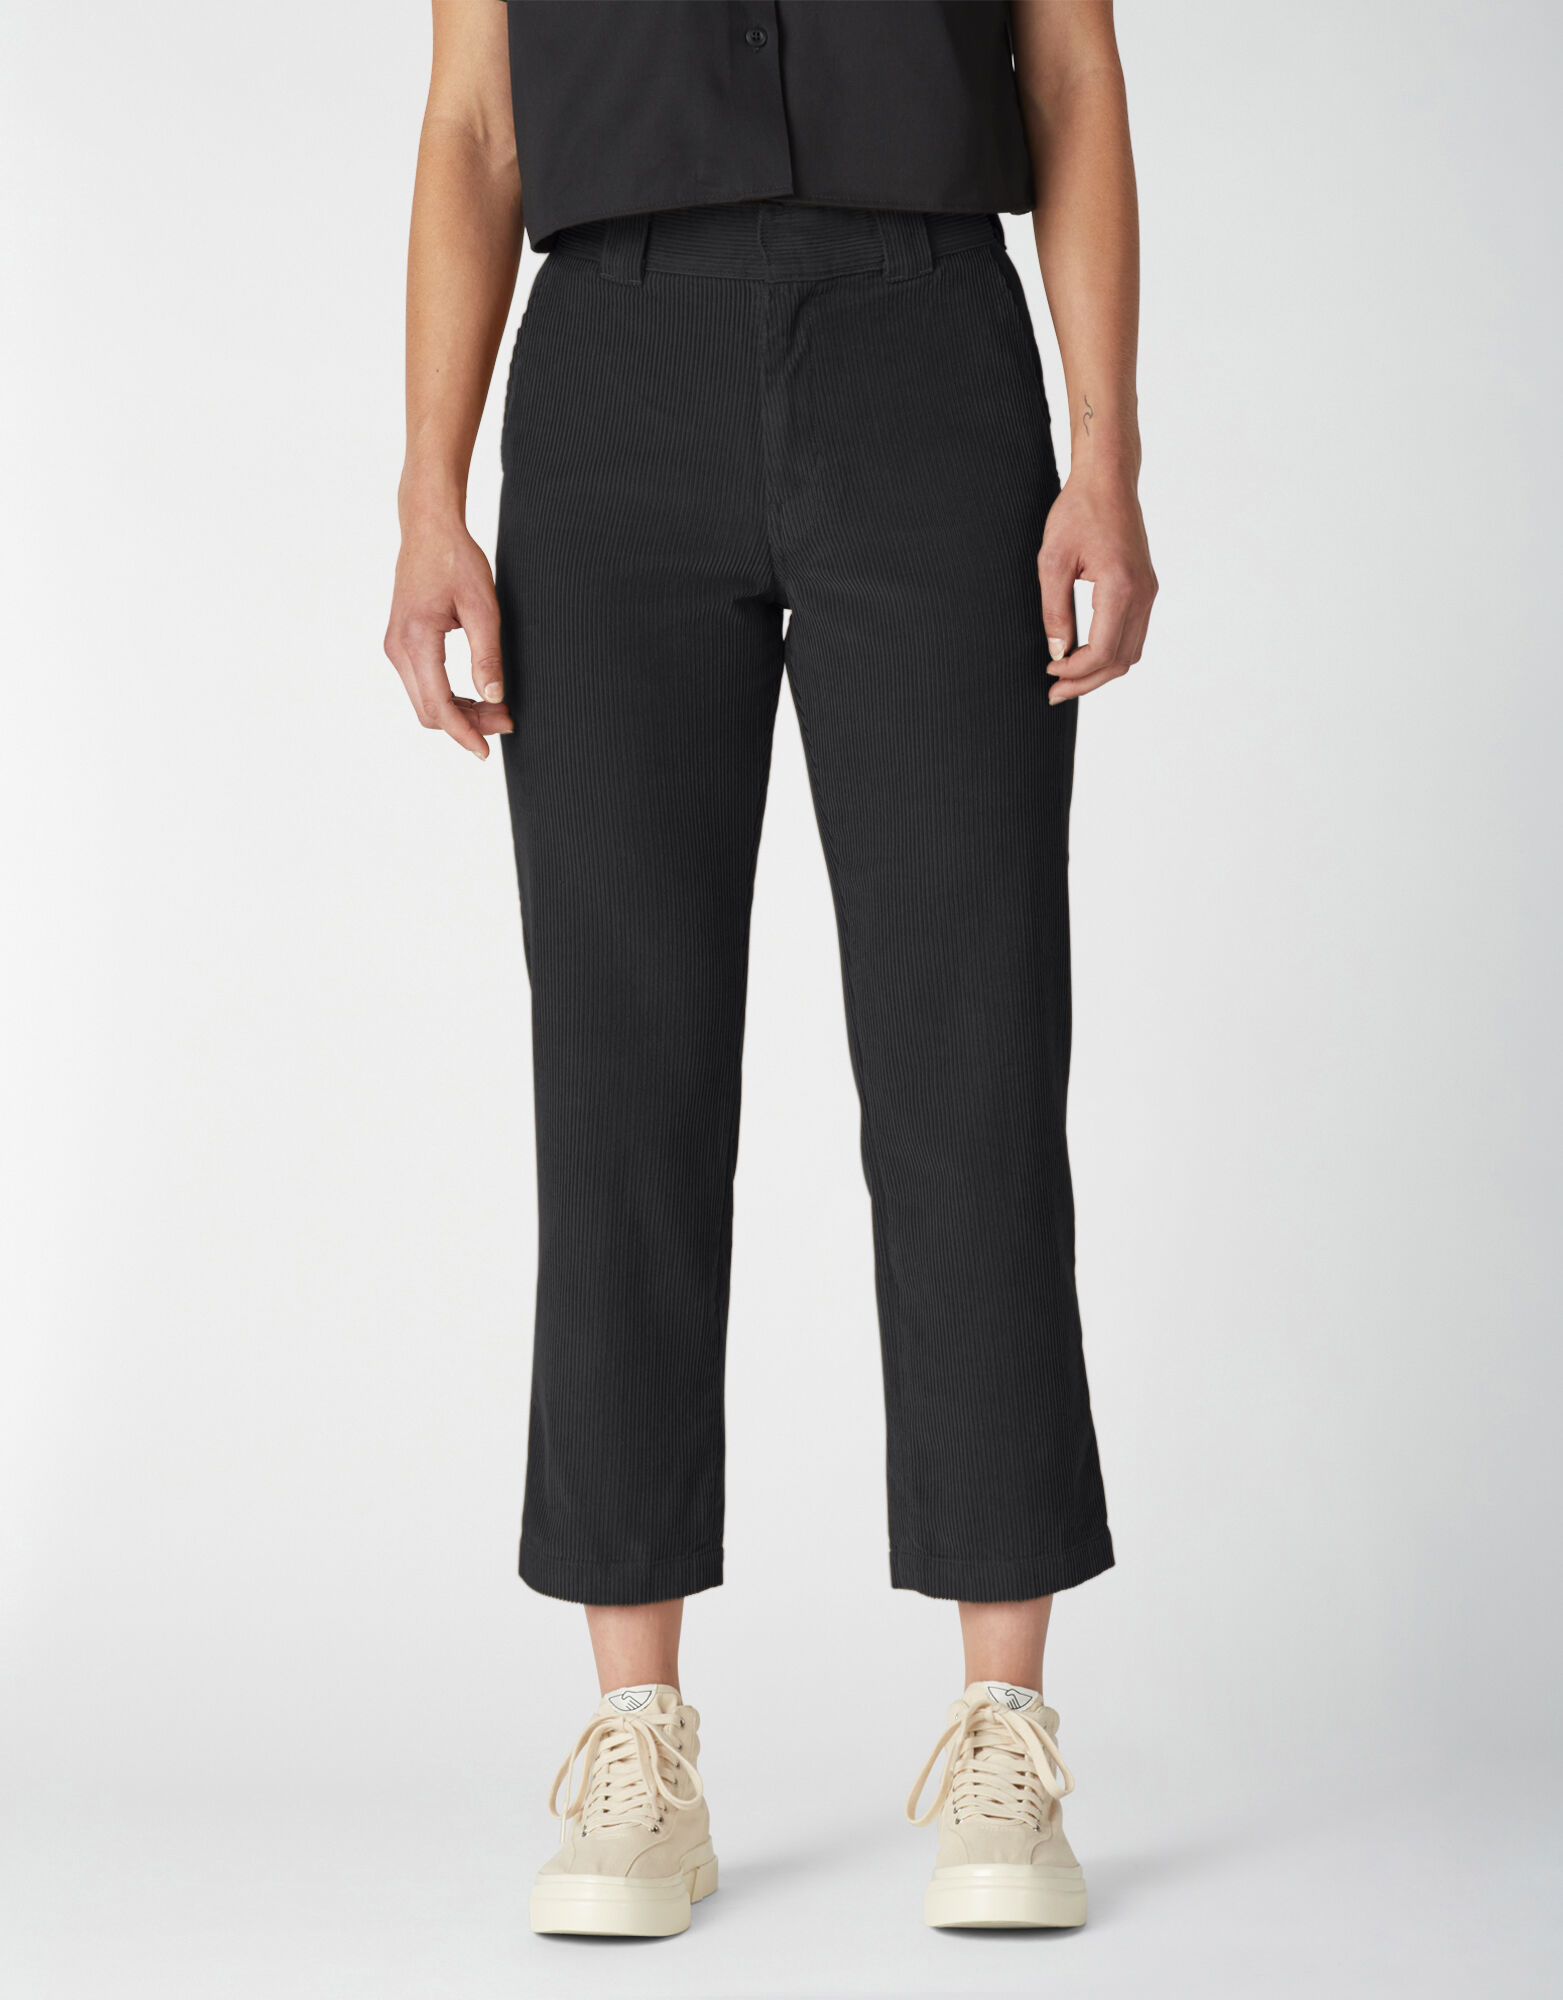 Women’s Reworked Corduroy Ankle Pants